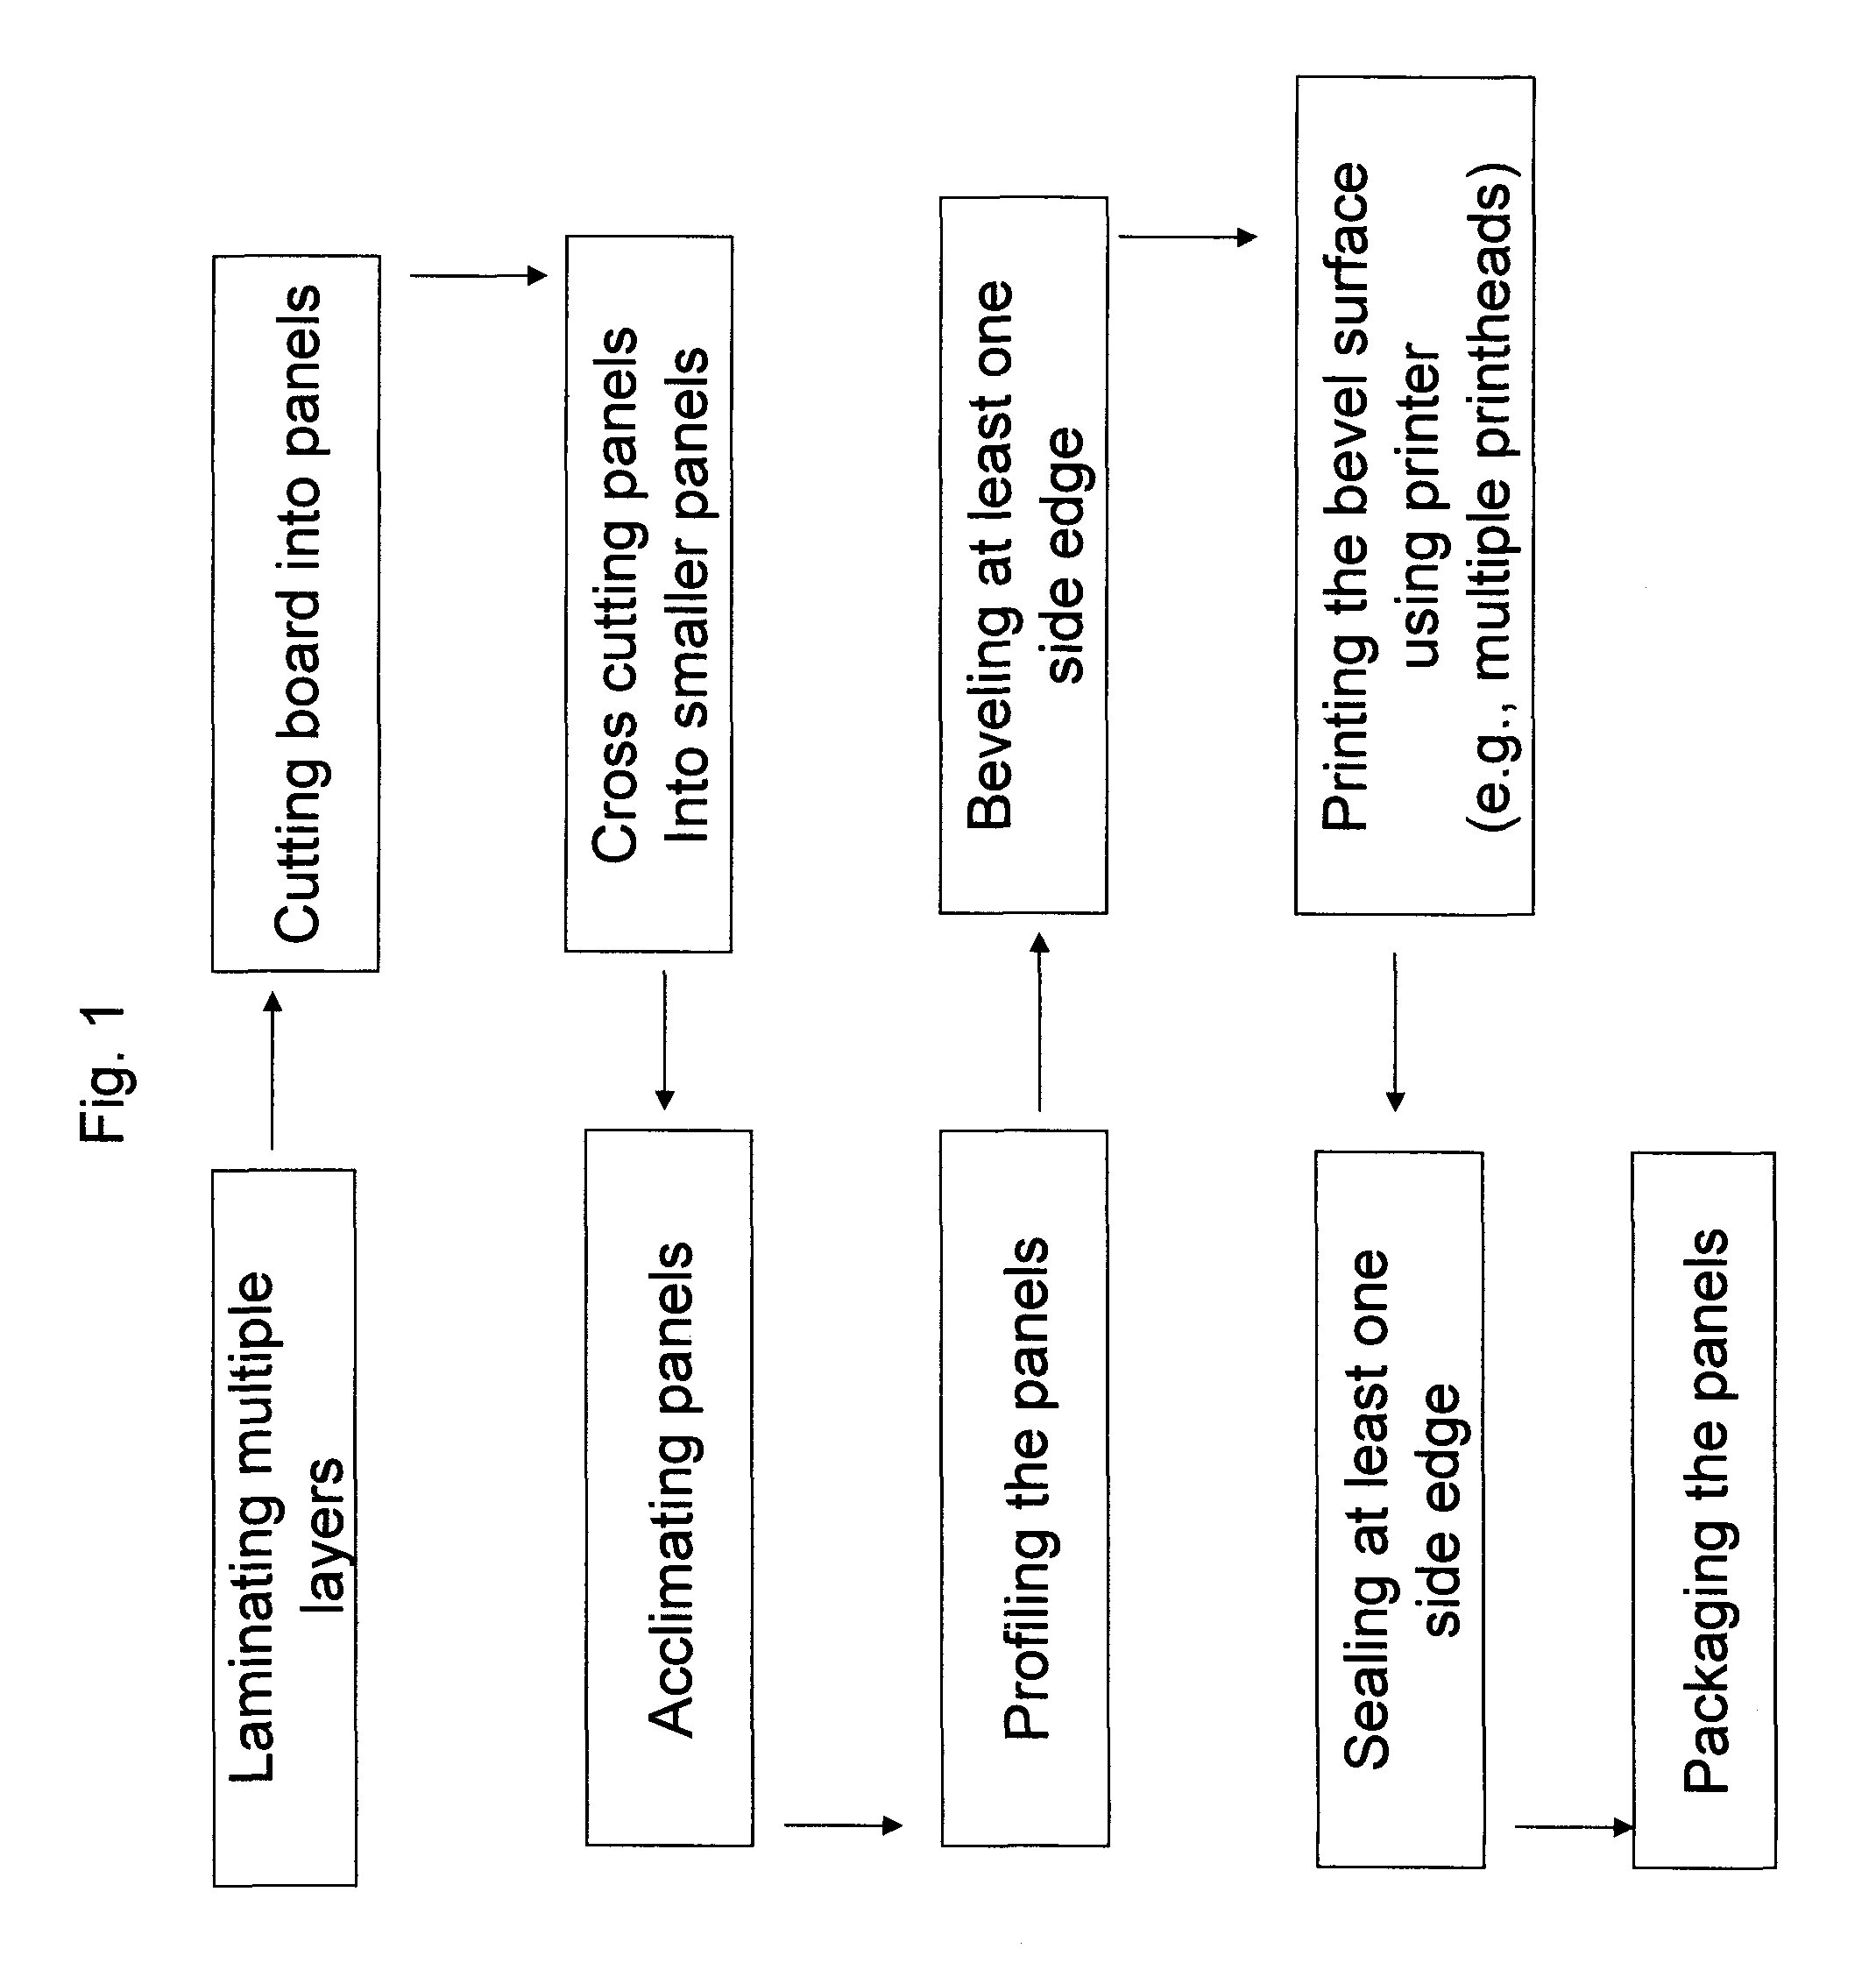 Methods and systems for decorating bevel and other surfaces of laminated floorings